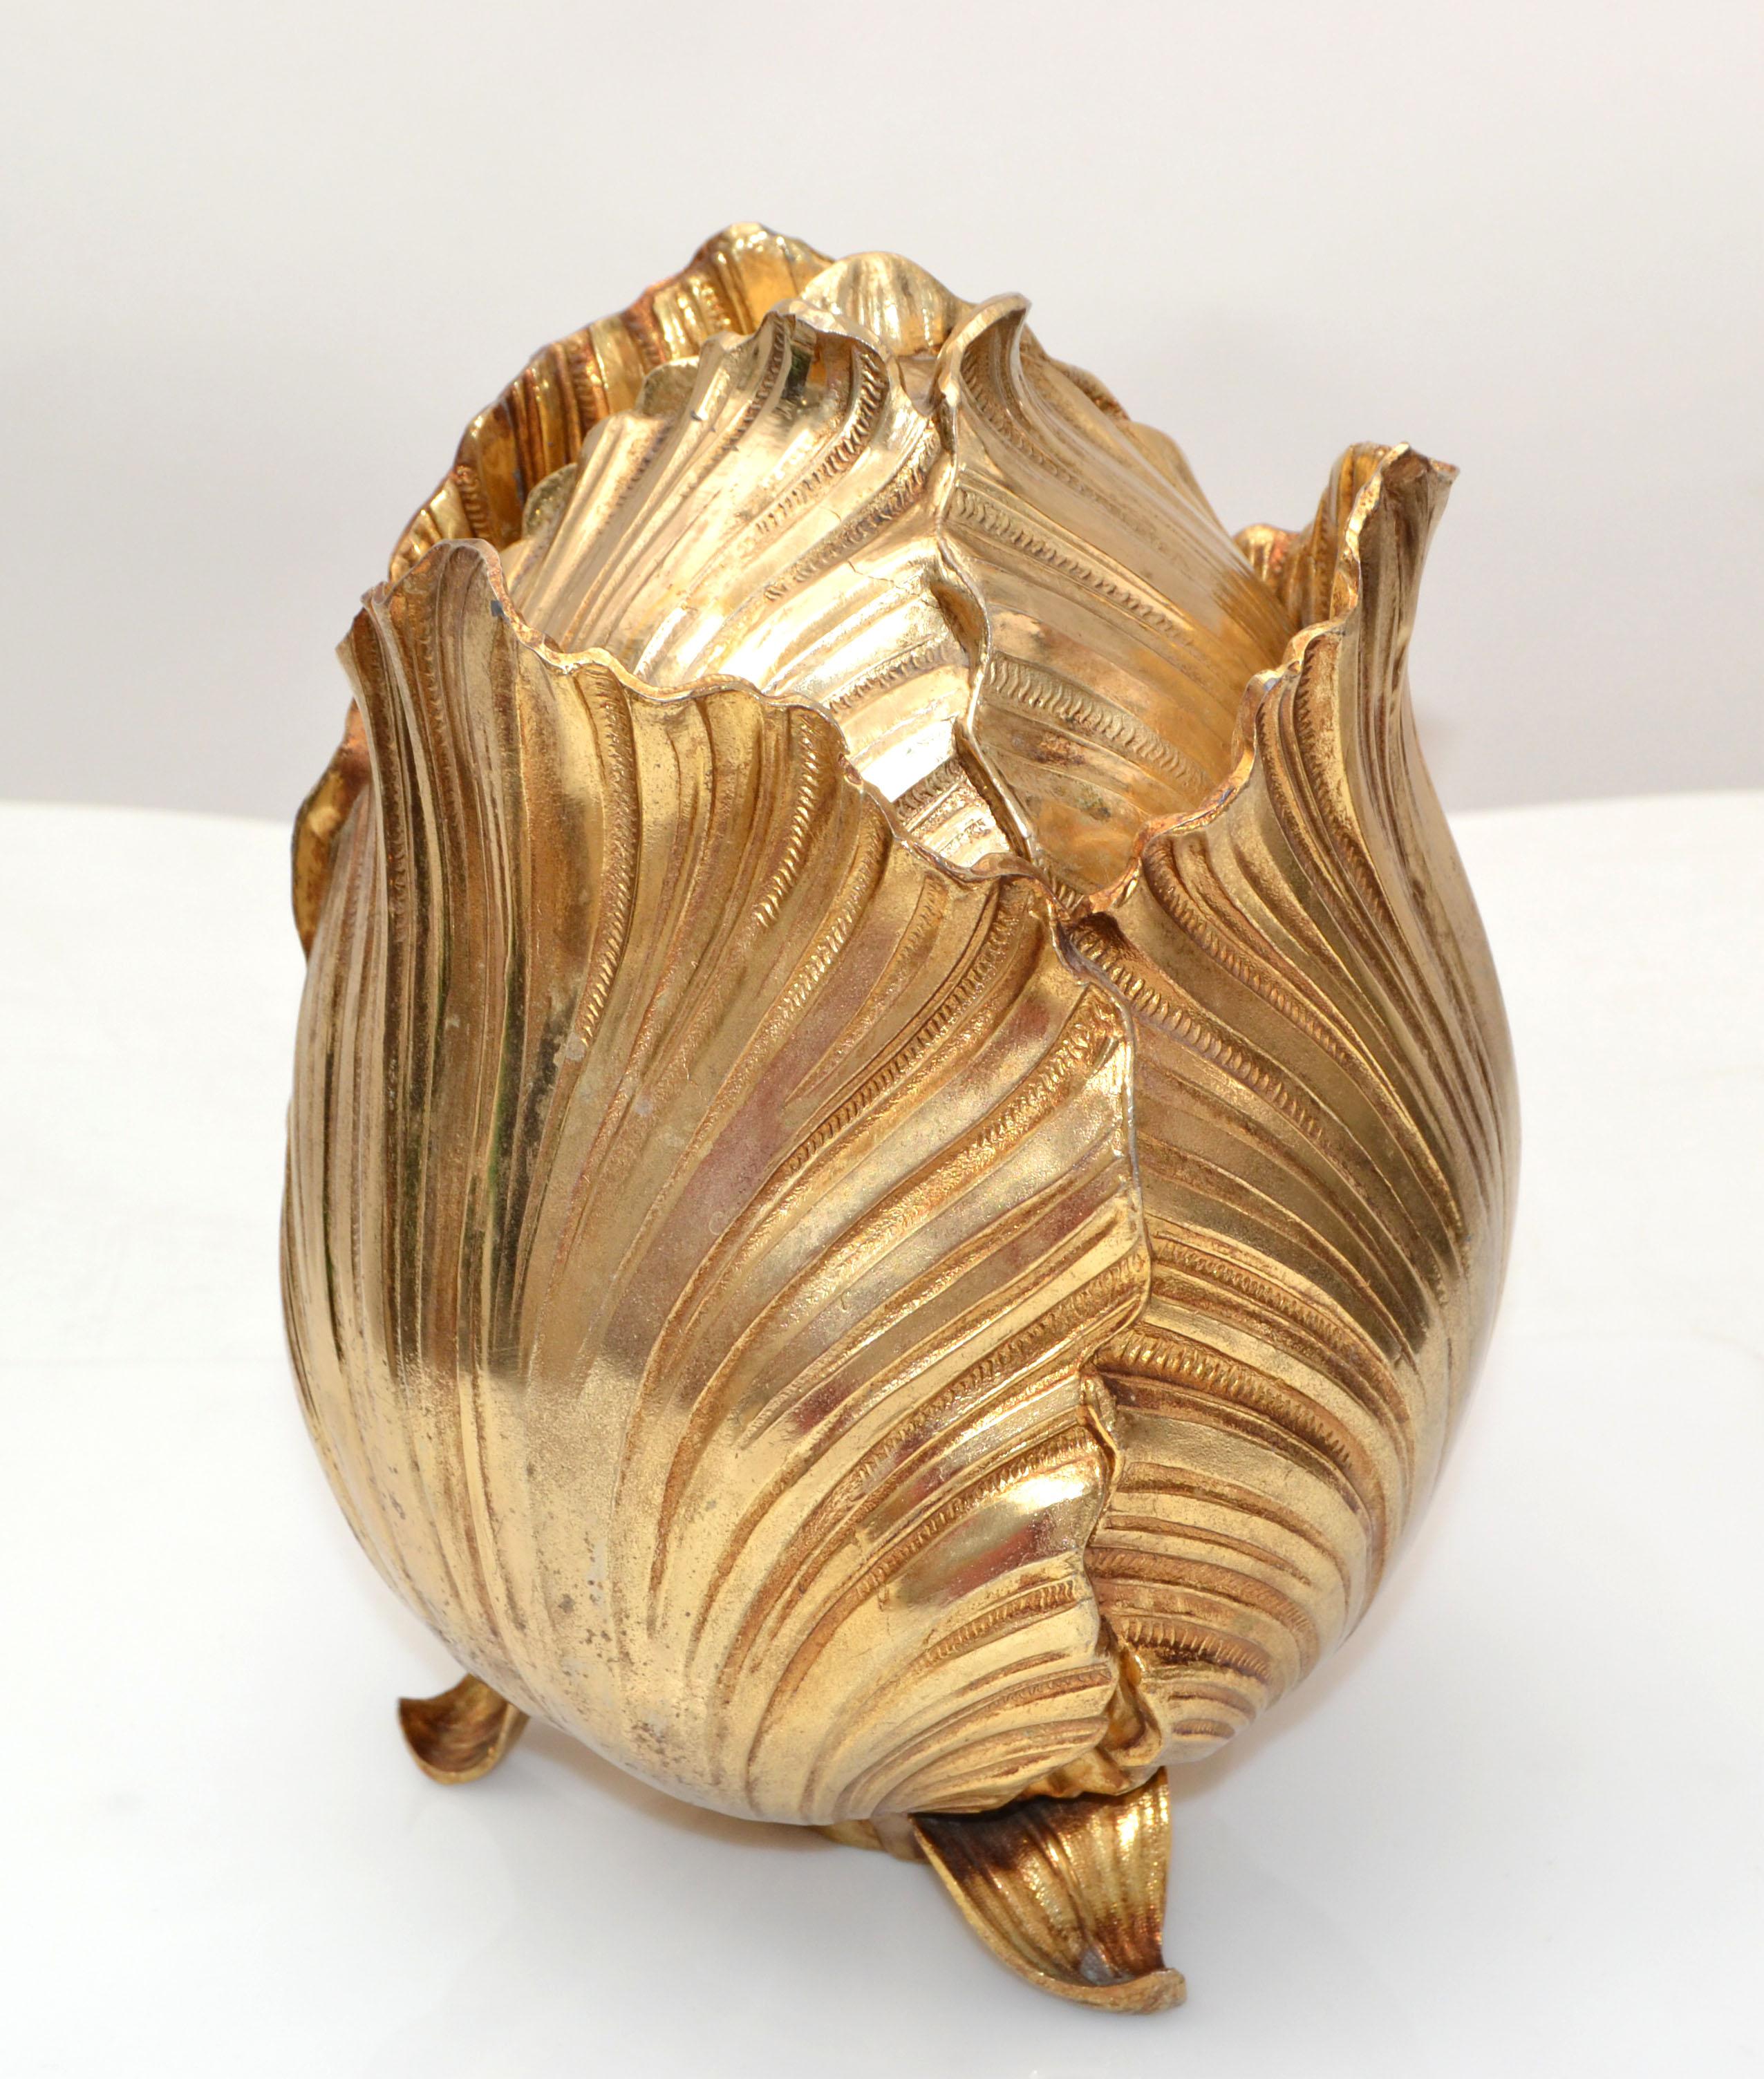 1970 Artichoke ice bucket designed by Mauro Manetti and made in Italy.
The core is gold plate over cast aluminum with a white plastic insulation.
Marked at the Base and numbered: Firenze, M/M, Made in Italy.